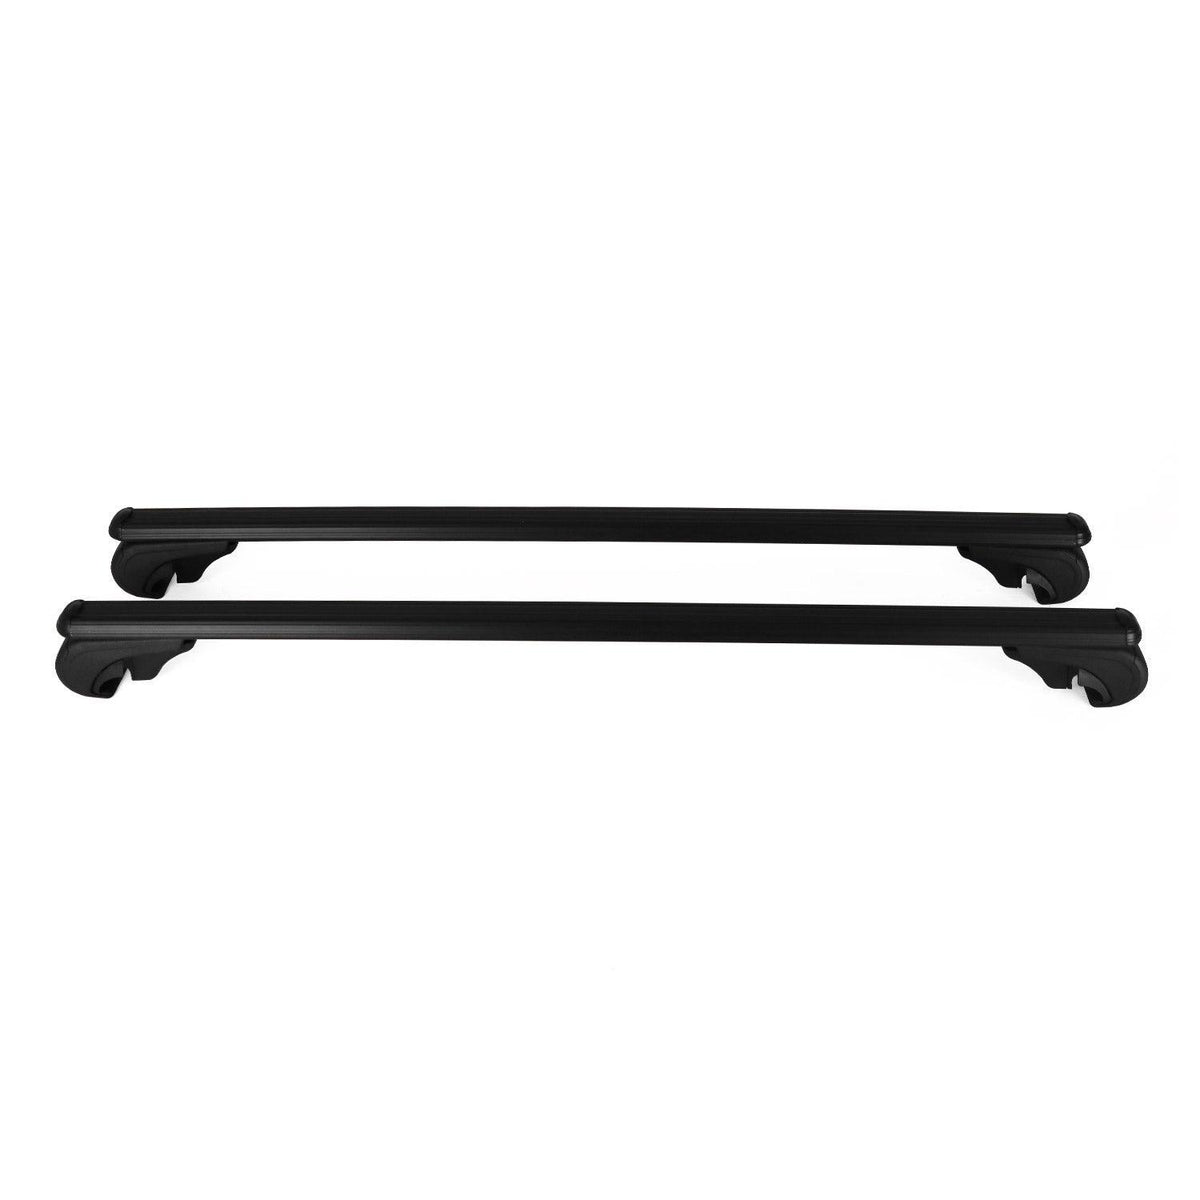 Lockable Roof Rack Cross Bars Luggage Carrier for Ford Escape 2013